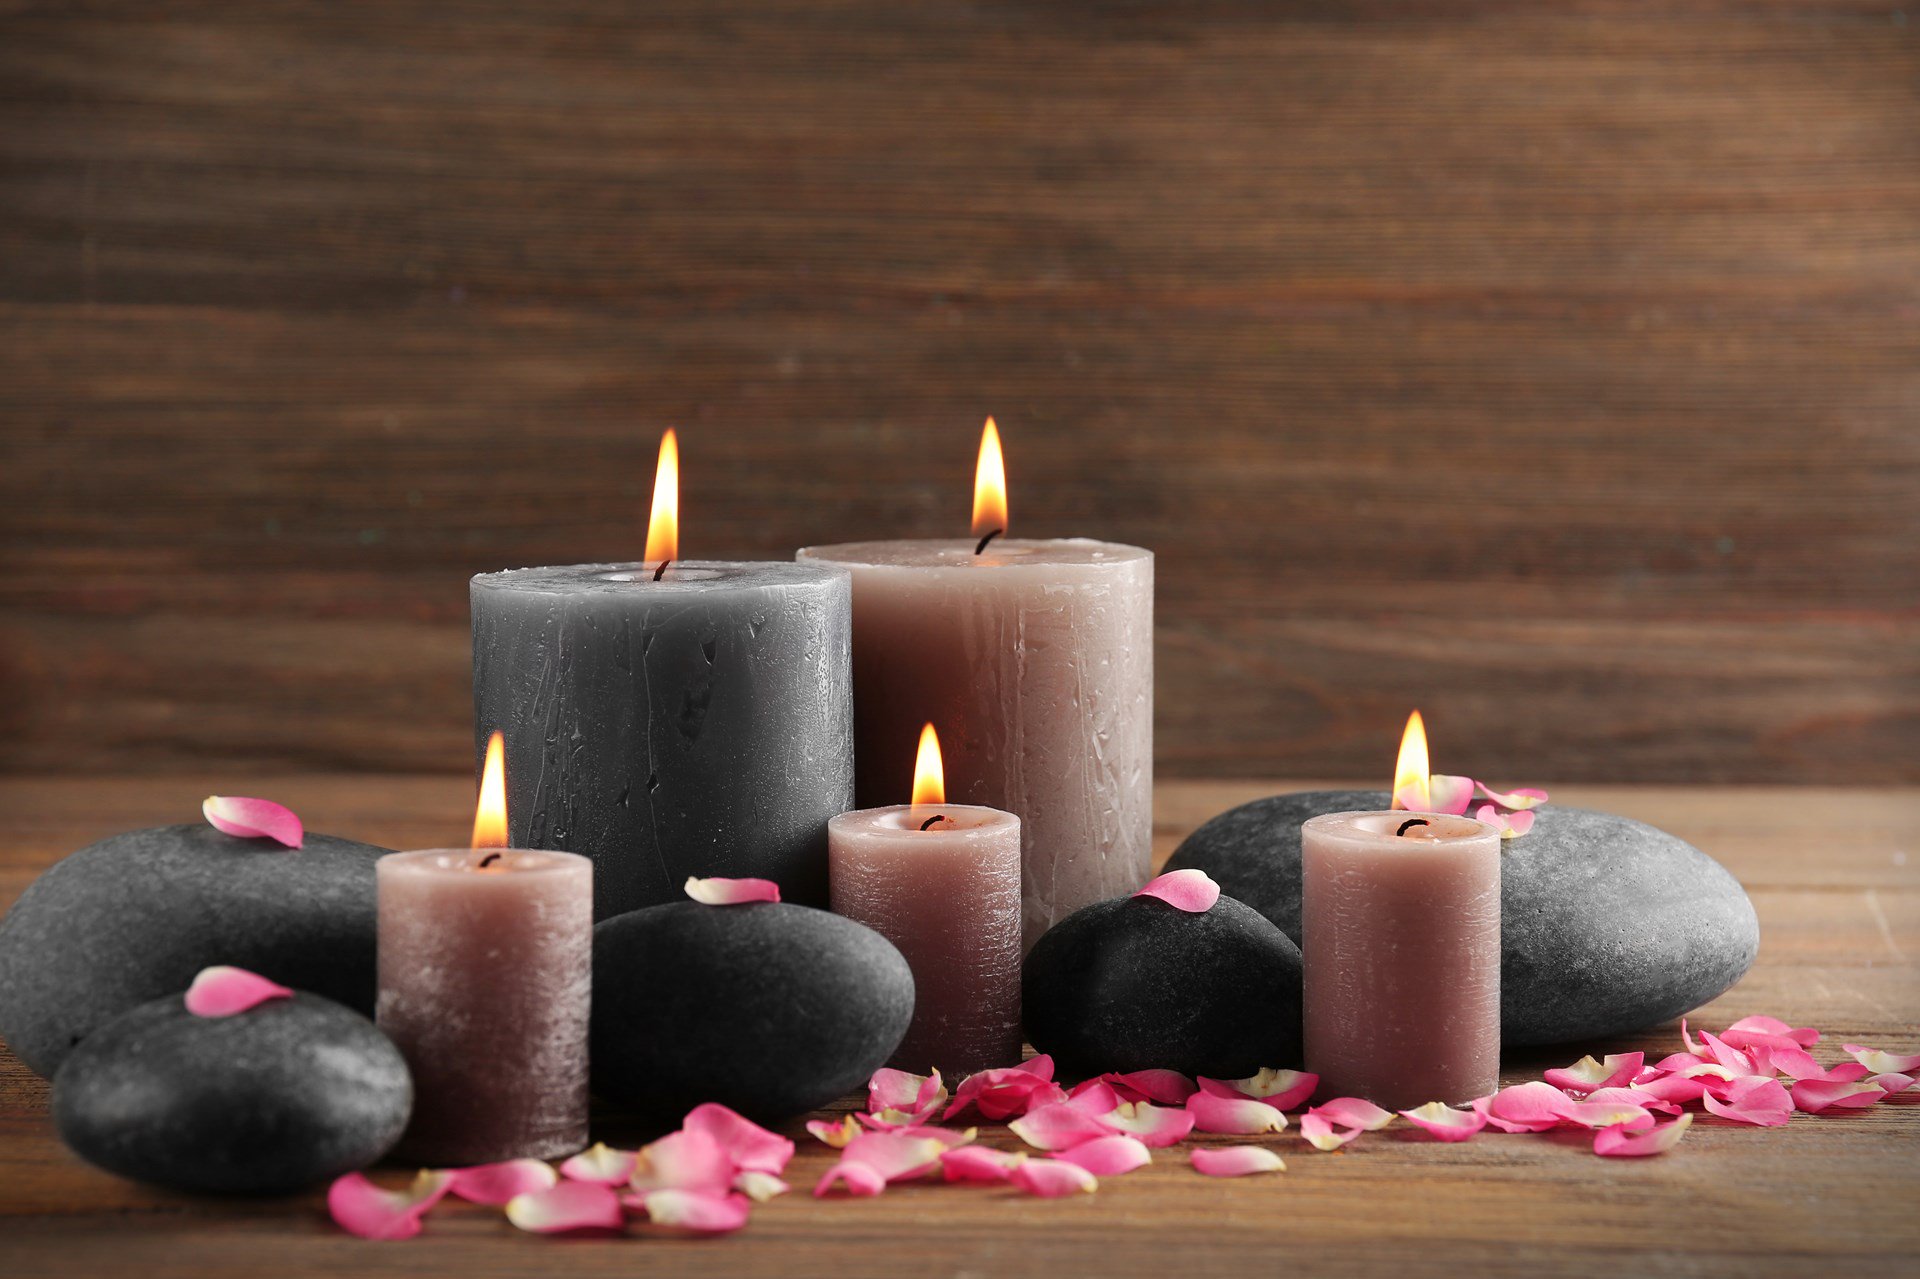 Latest Trends in Scented Candles Industry 2019-2025